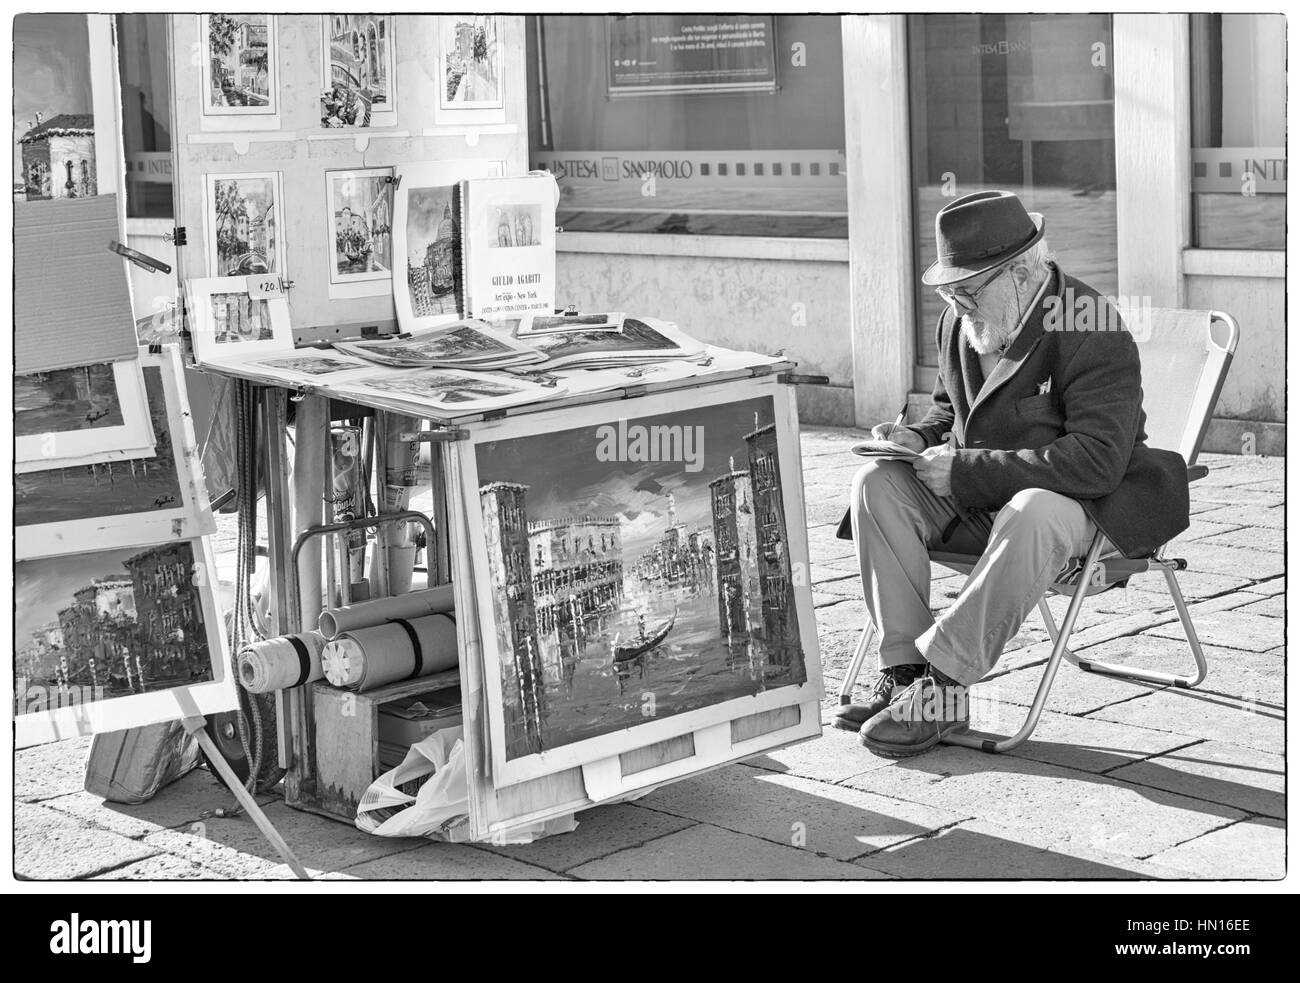 Artist with paintings for sale in monochrome at Venice, Italy in January Stock Photo